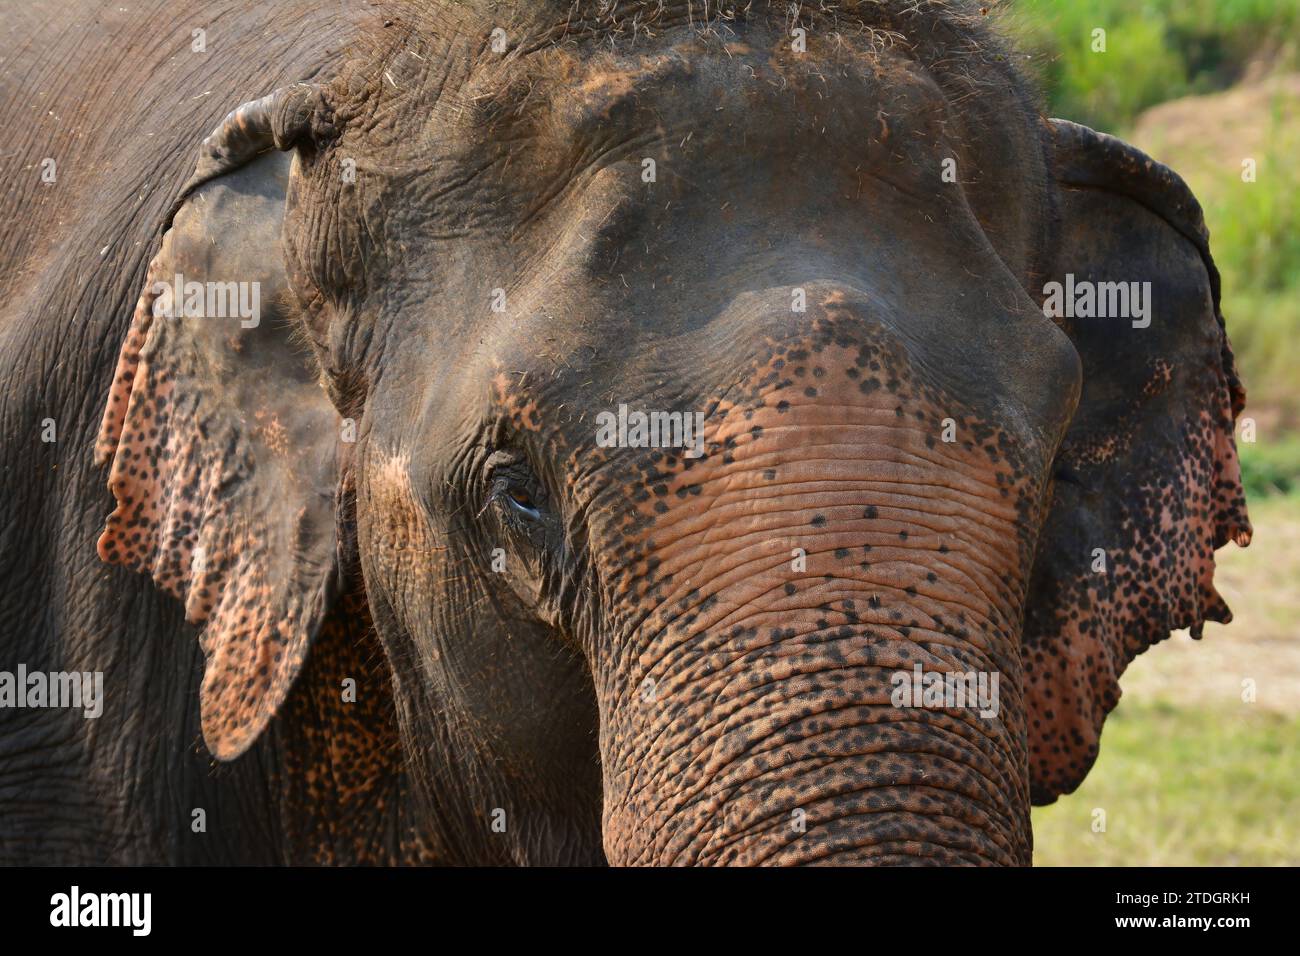 The Asian elephant, life expectancy: 48 years, length: 5.5 - 6.5 m (adult, including trunk, body length), height: 2.8 m (male) Stock Photo